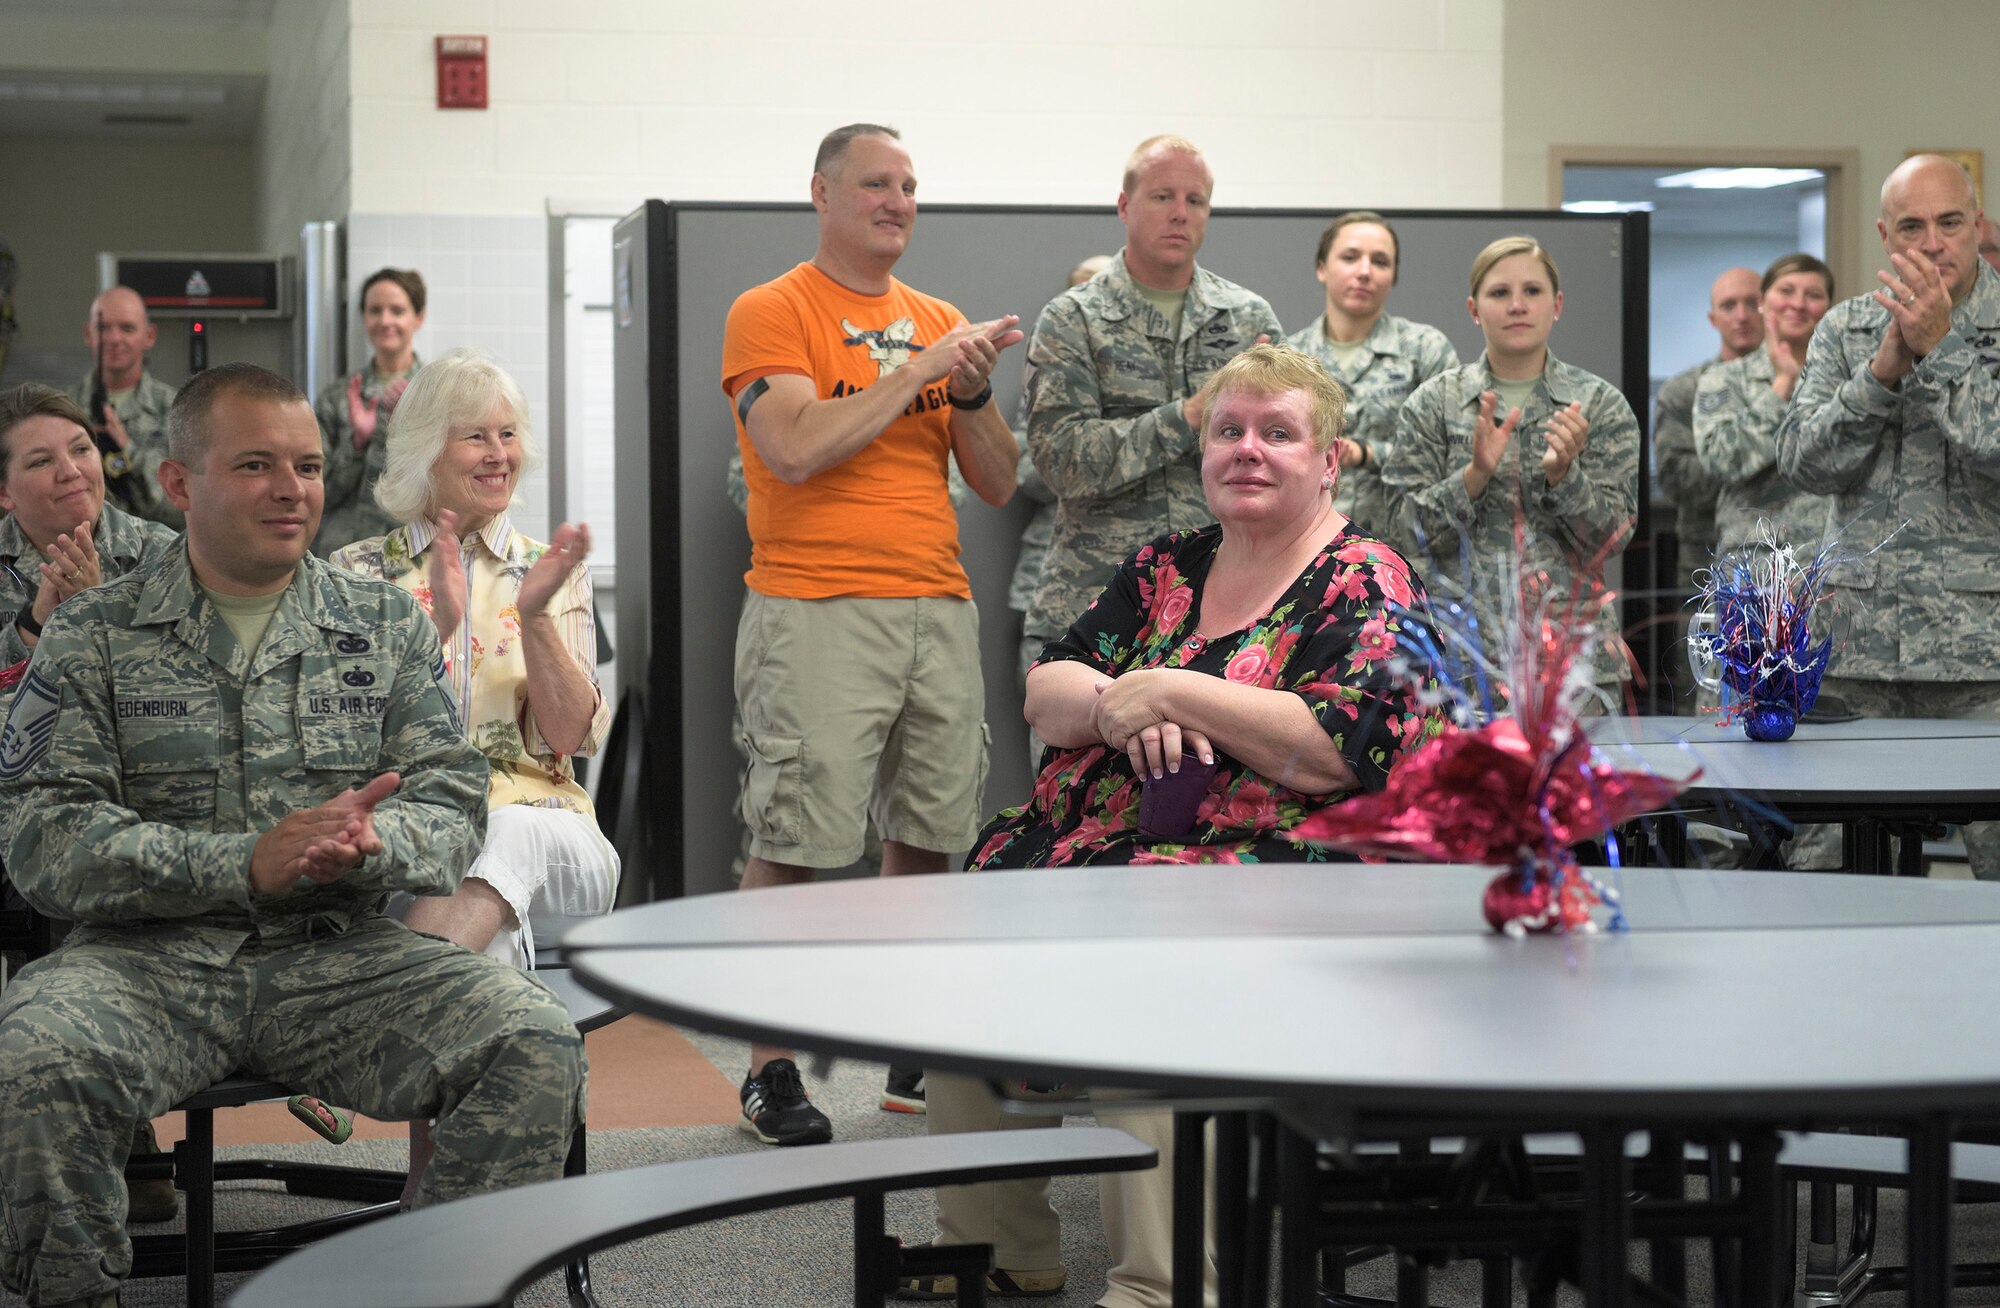 Current and former colleagues applaud Patricia Tetidrick, an administrative support technician with the 182nd Logistics Readiness Squadron, Illinois Air National Guard, at a luncheon held in her honor in Peoria, Ill., July 28, 2016. Tetidrick retired Aug. 1 after 41 years, five months and 21 days of service as a Title 5 federal technician. (U.S. Air National Guard photo by Staff Sgt. Lealan Buehrer)